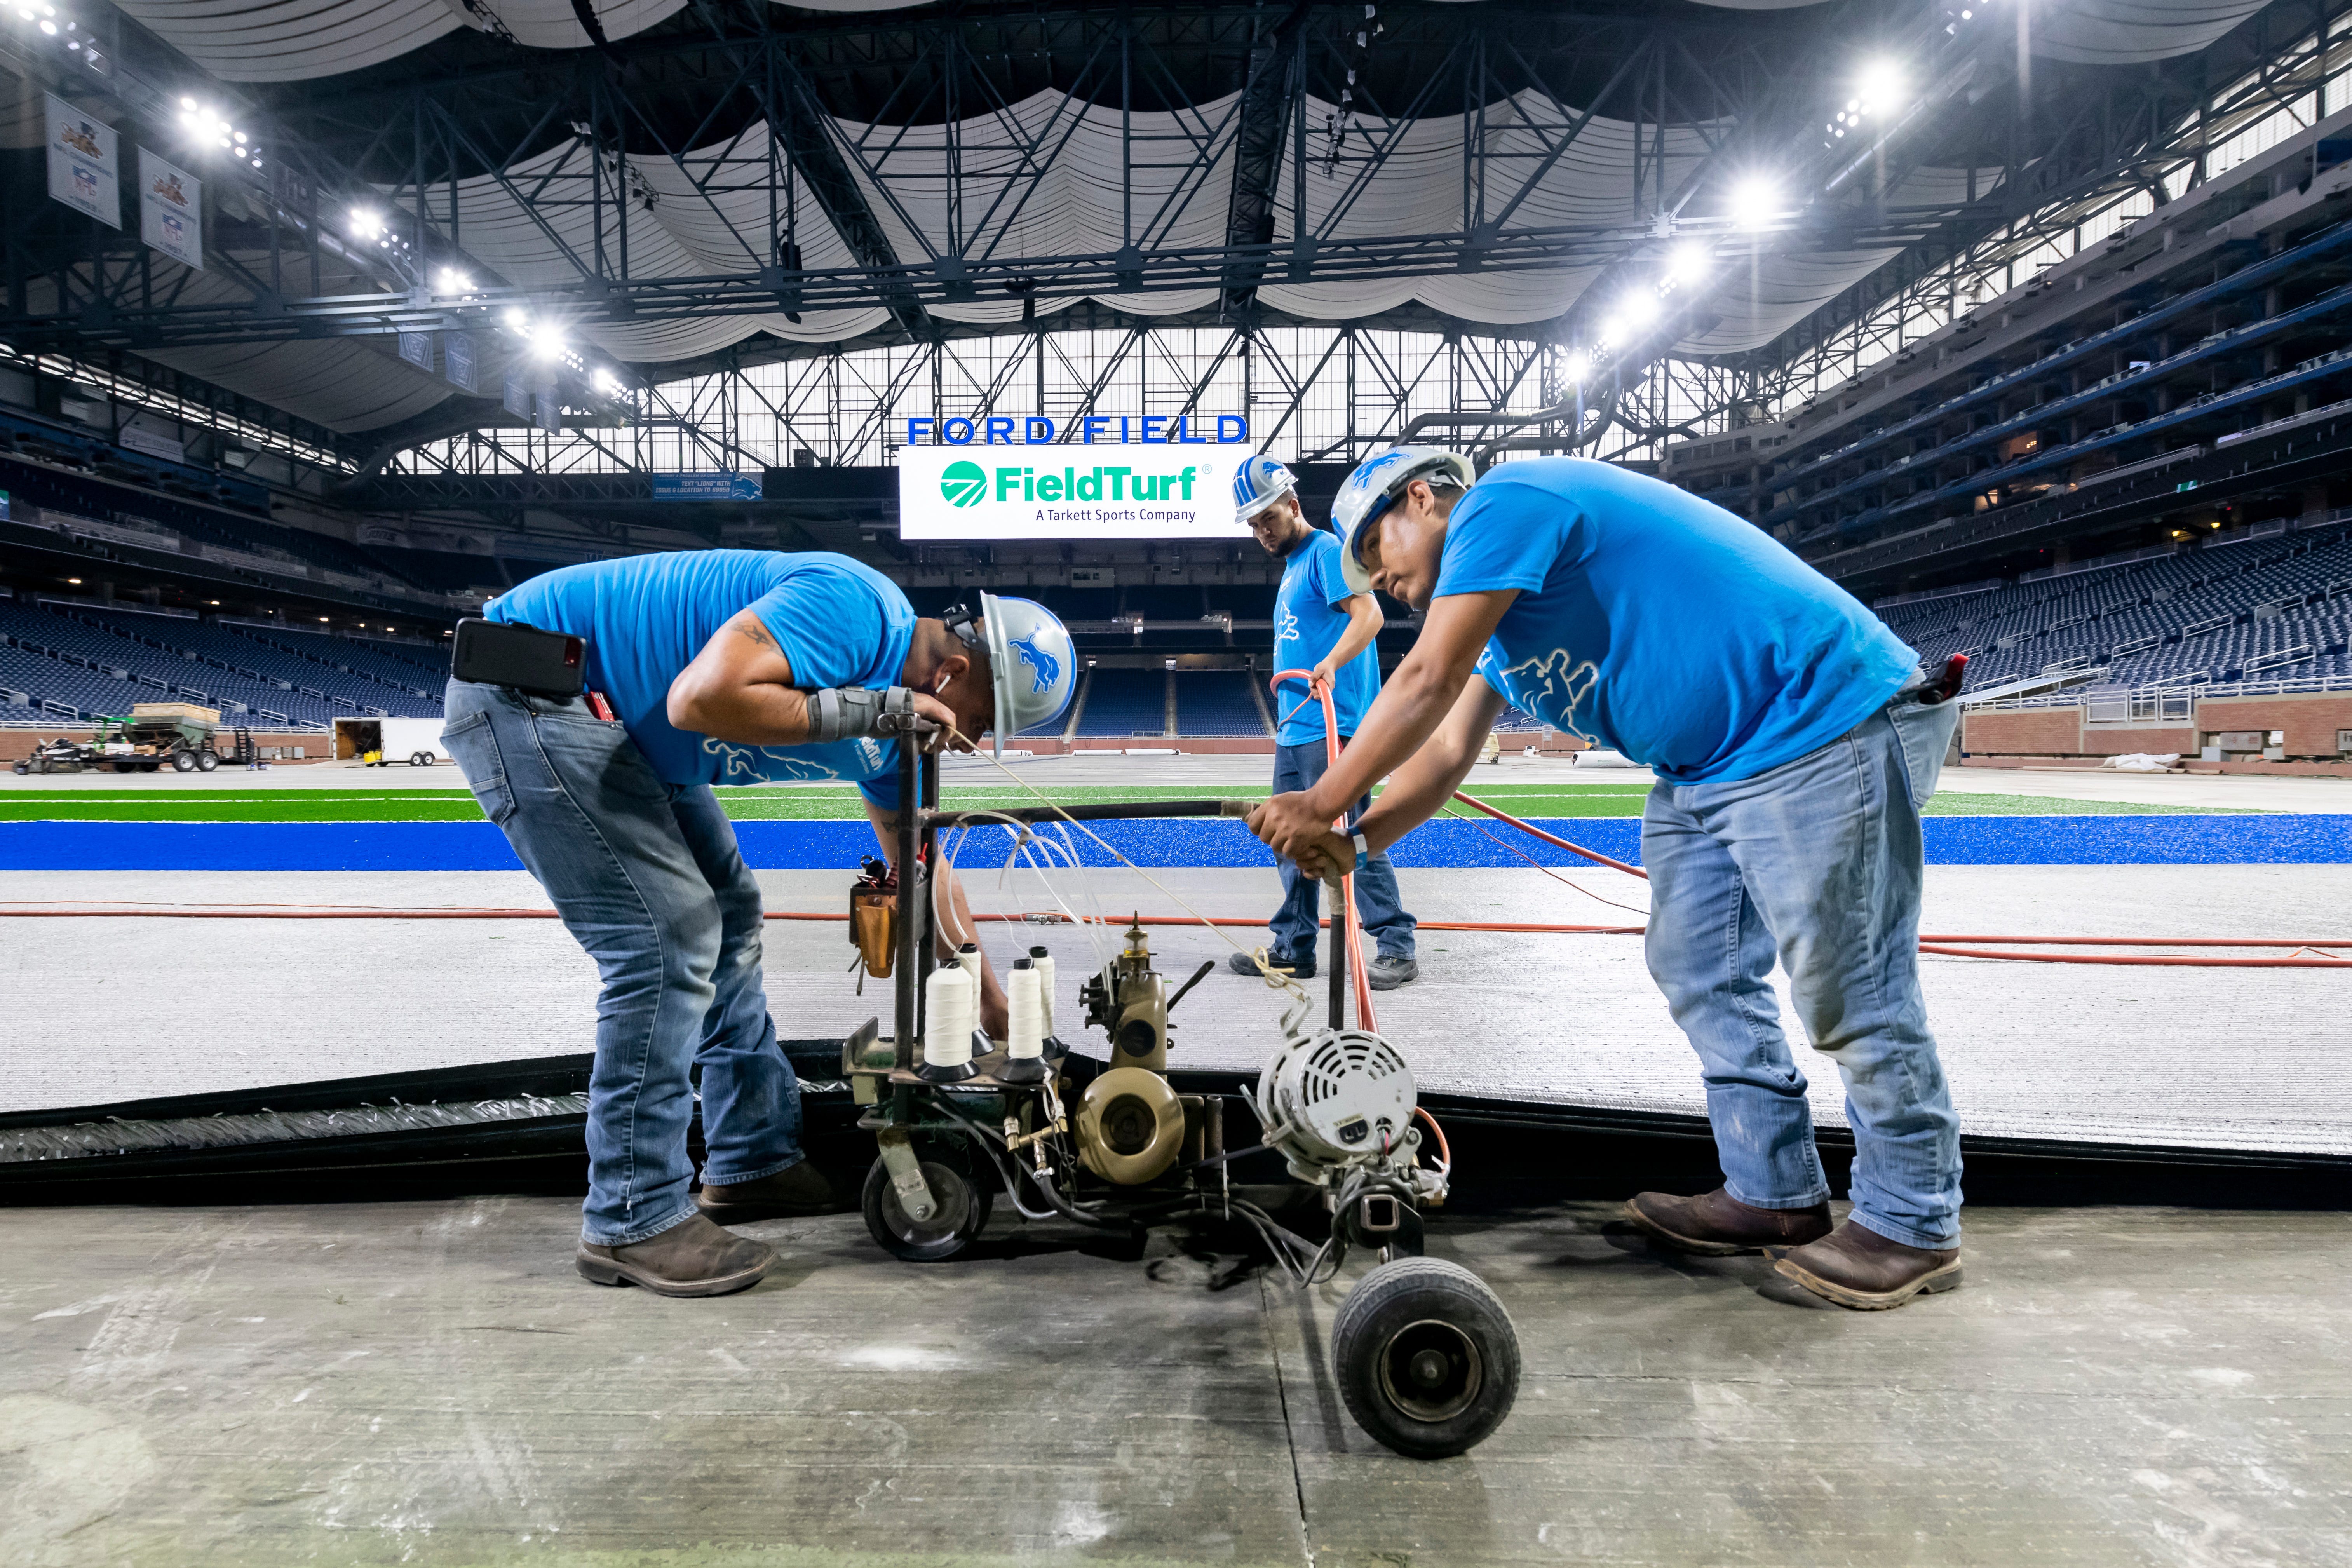 FieldTurf employees use an industrial sewing machine to connect two pieces of a new playing surface together at Ford Field.